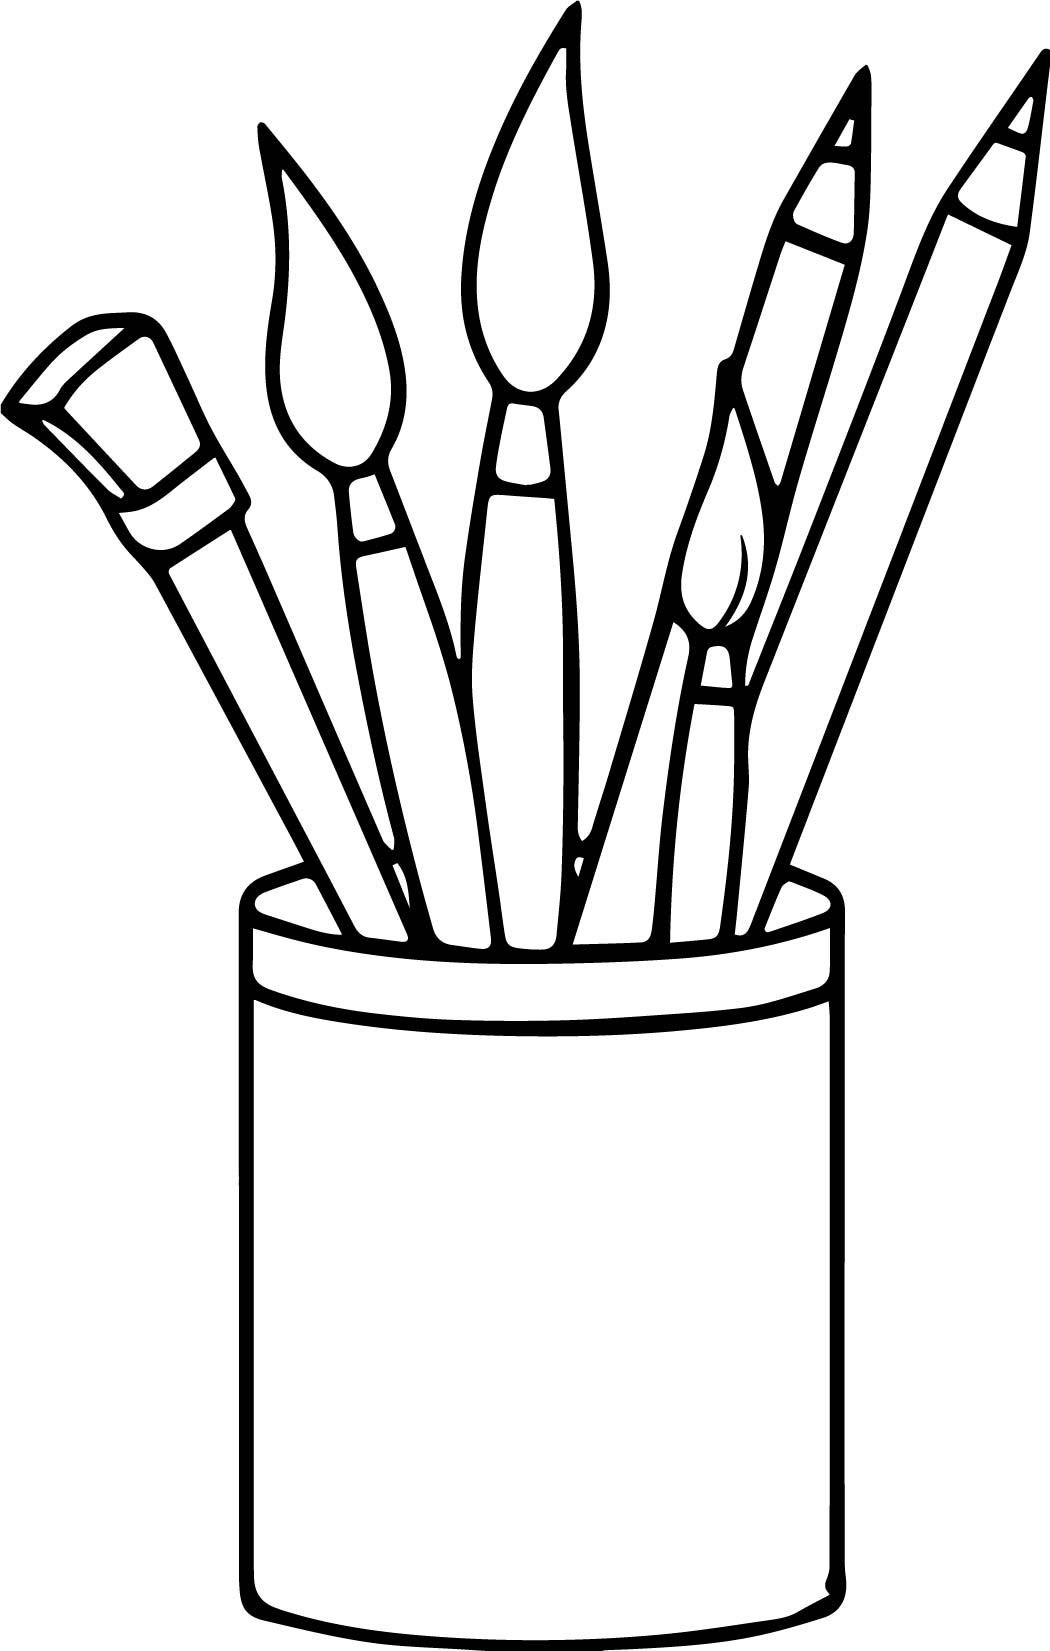 Picture of: Art Supplies Pencils Paint Brushes Coloring Page – Wecoloringpage